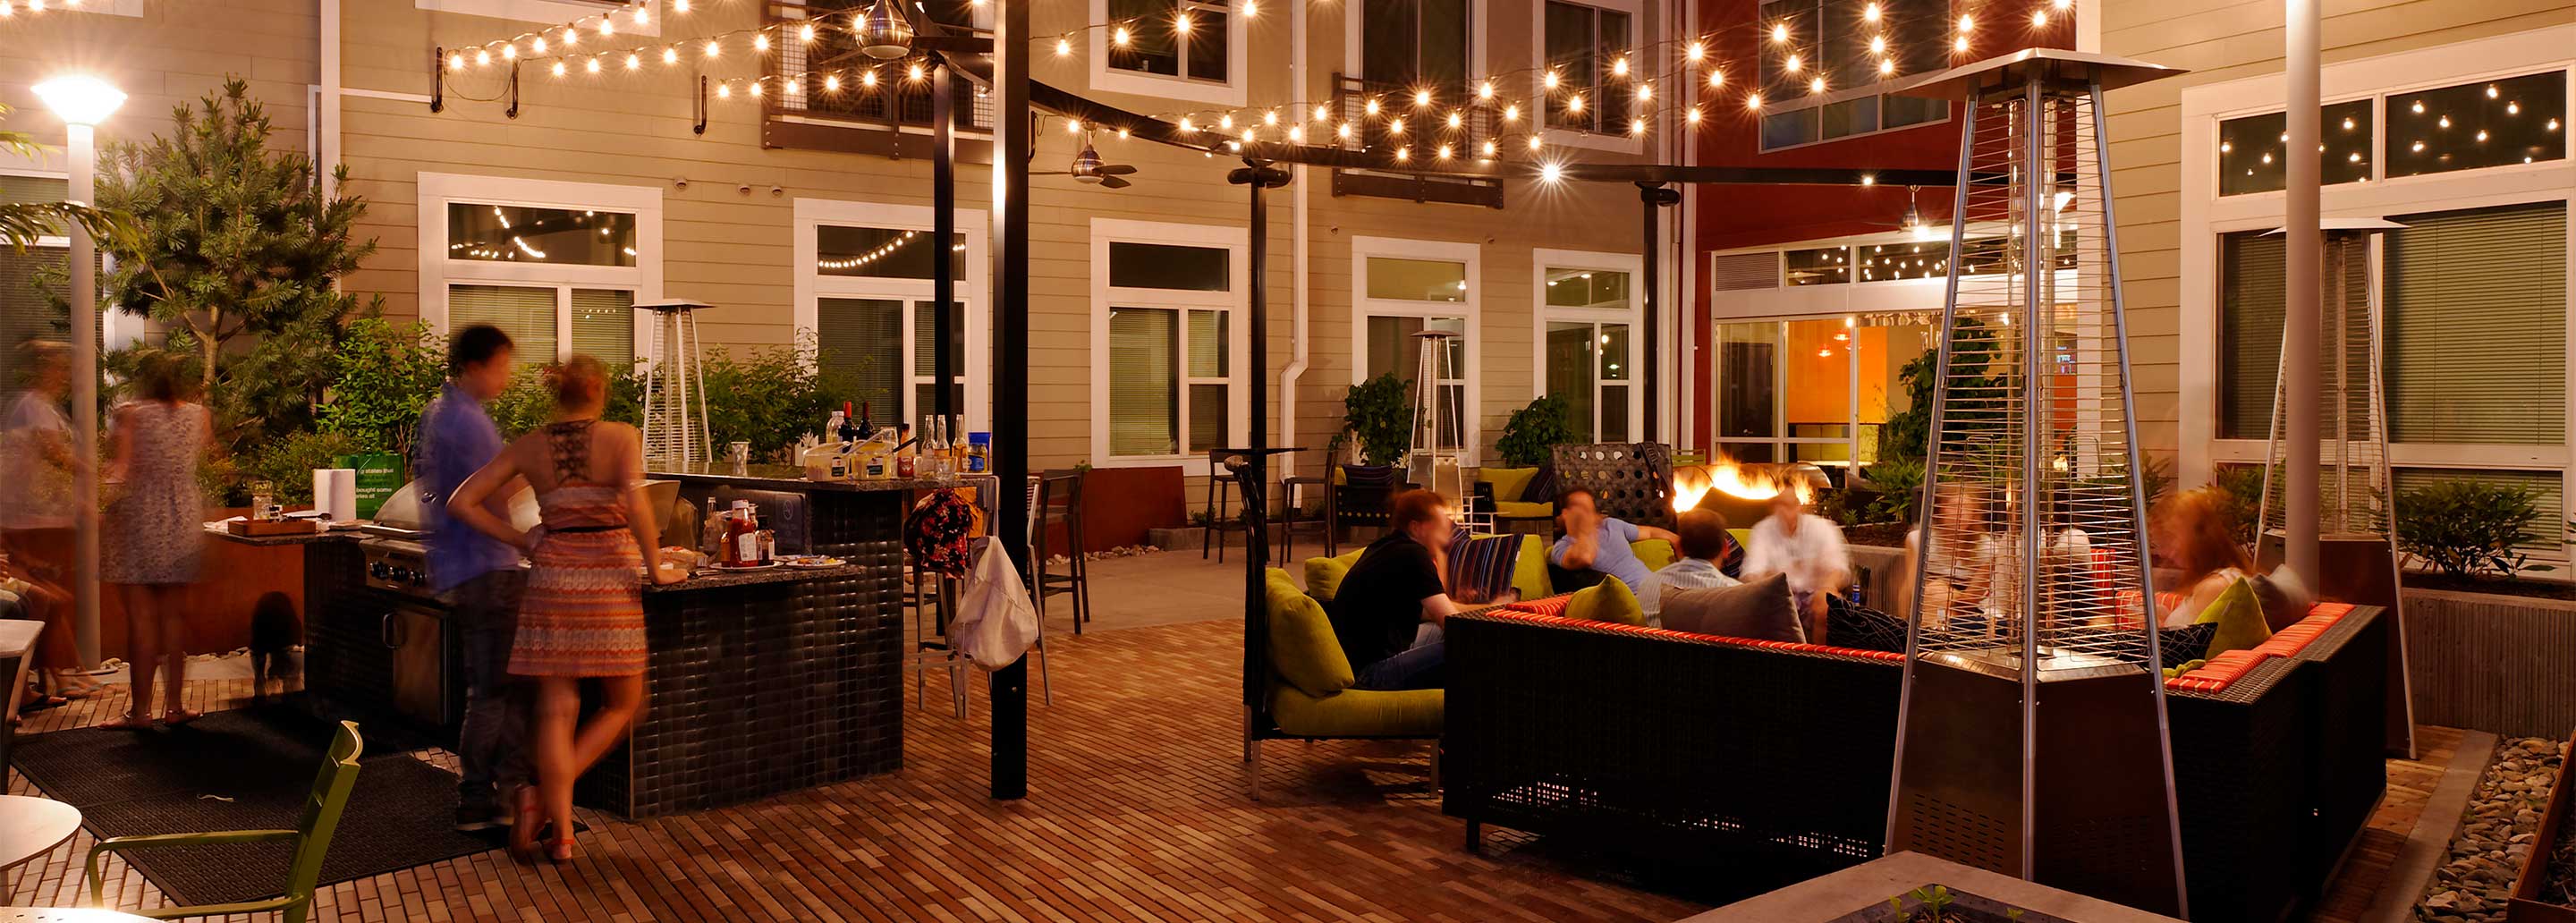 Outdoor chill lounge with fireplace, heat lamps and lounge seating